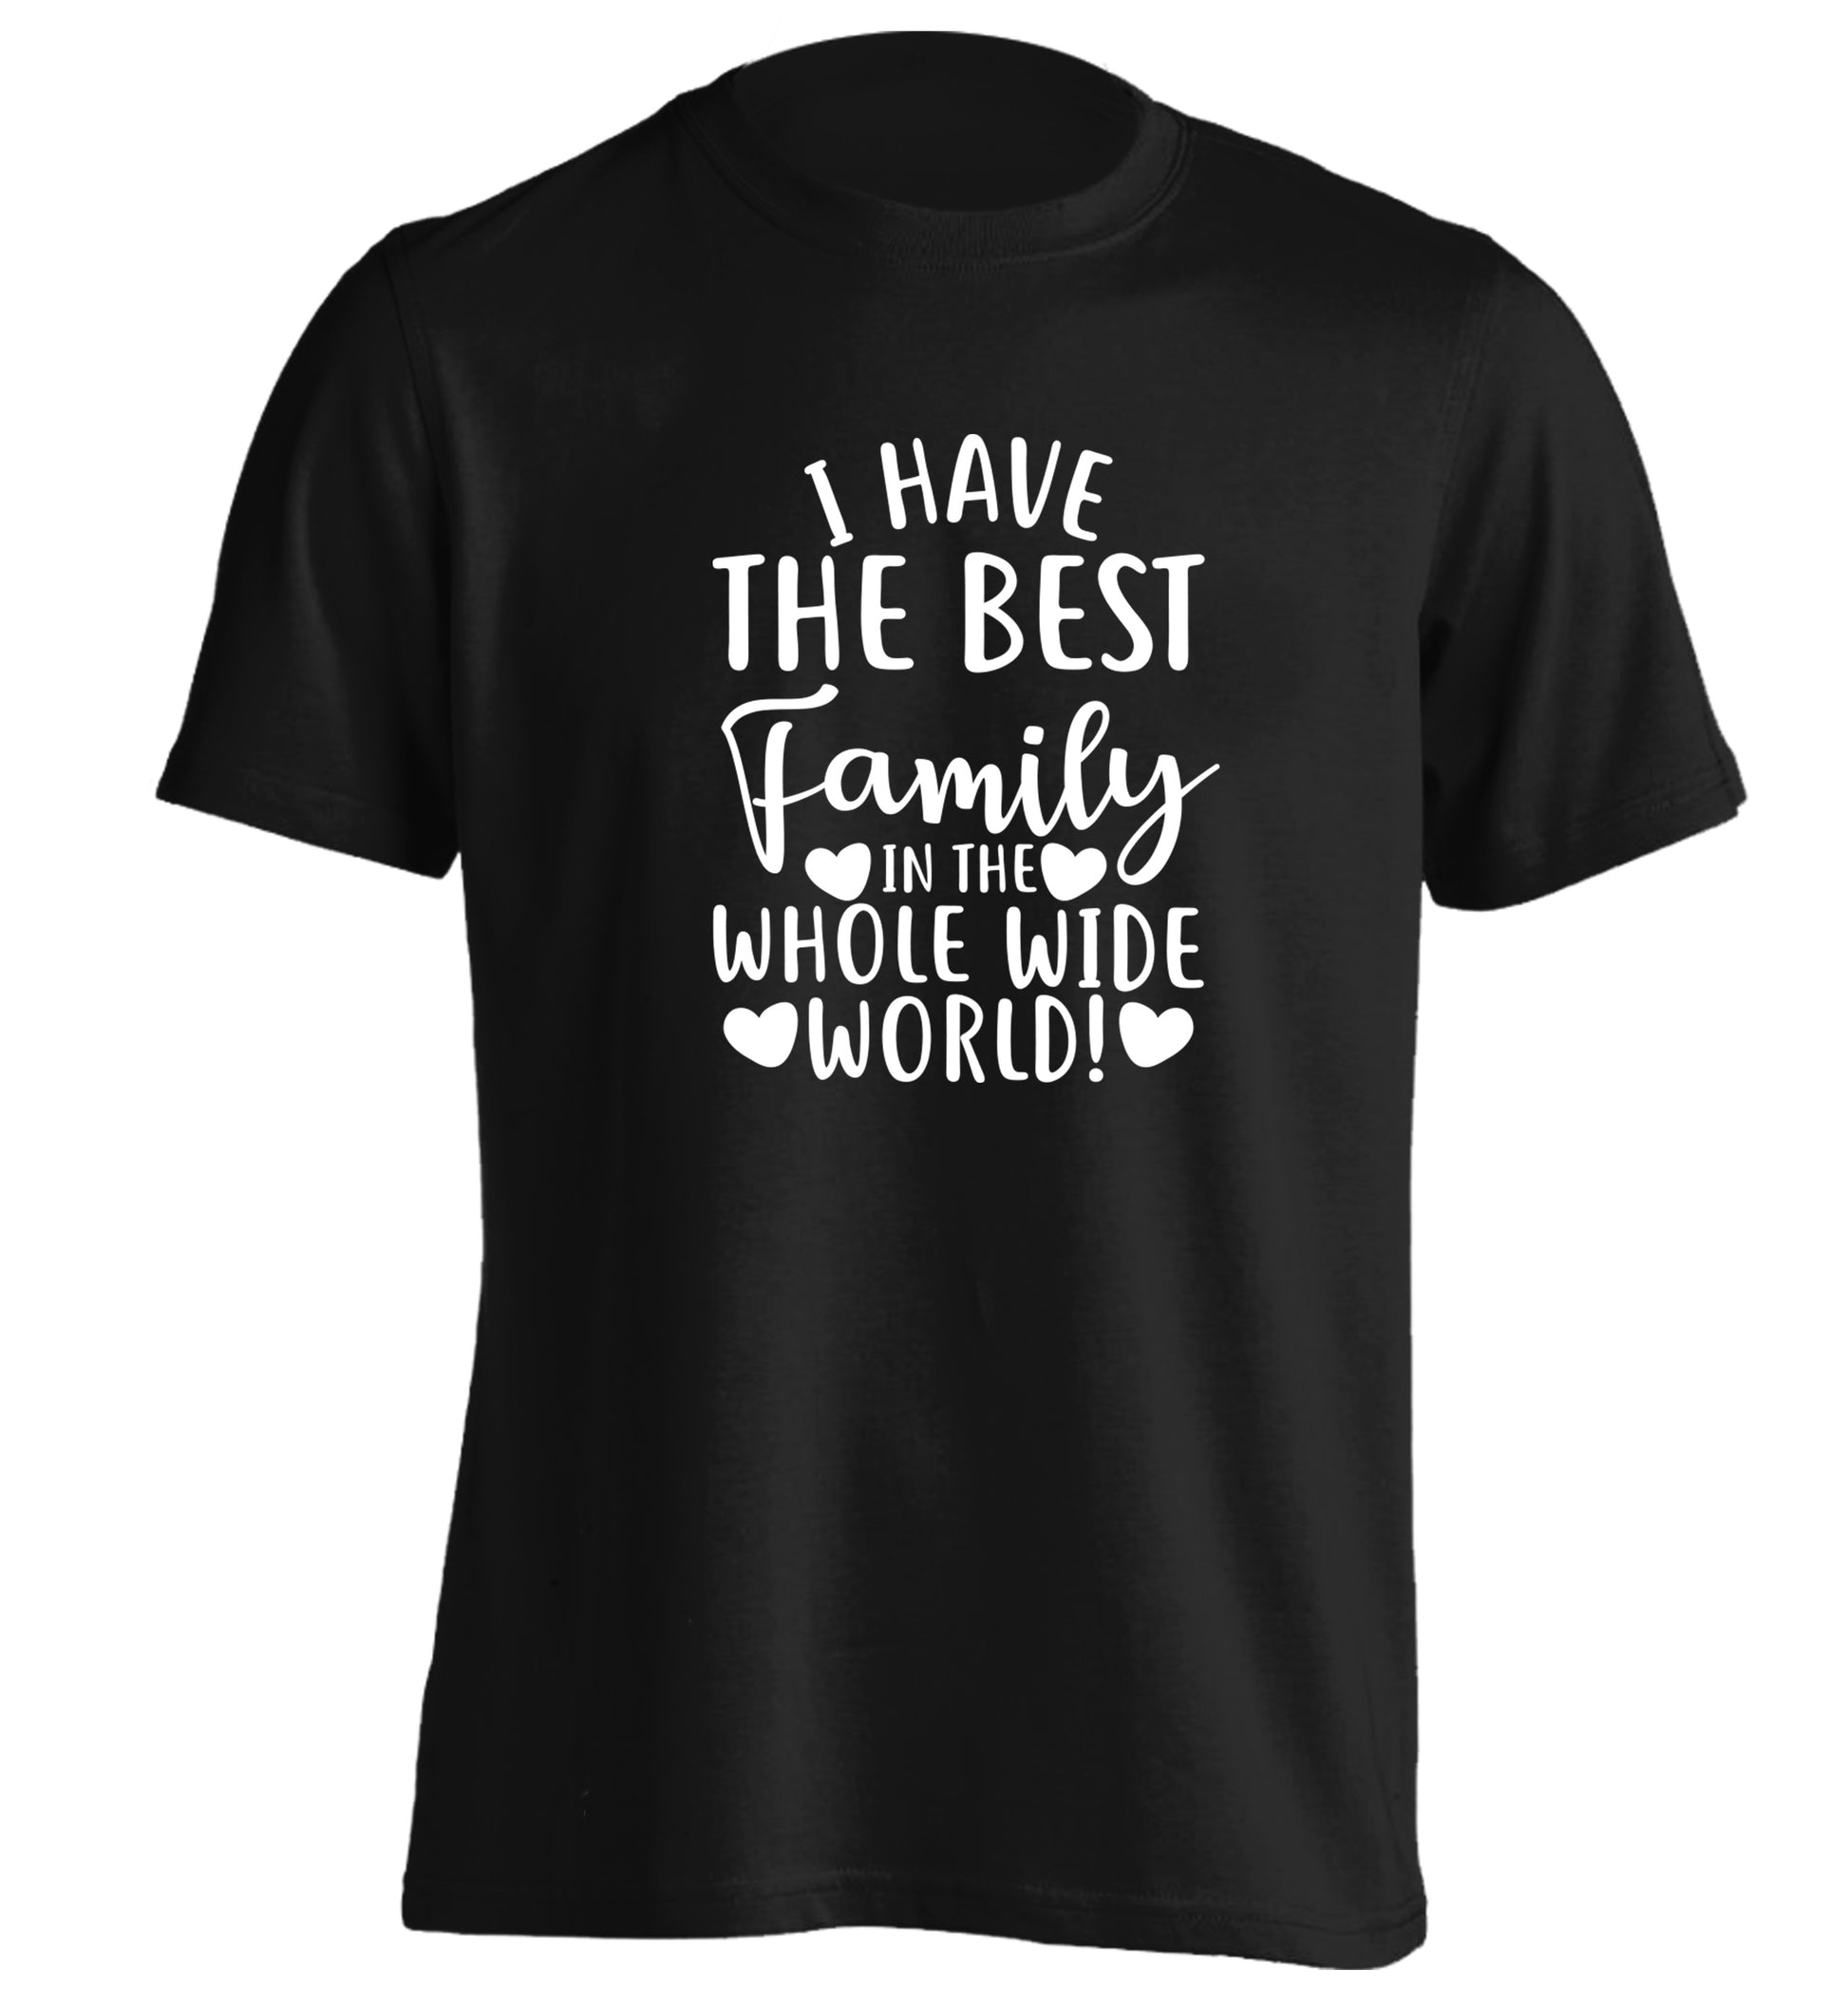 I have the best family in the whole wide world! adults unisex black Tshirt 2XL